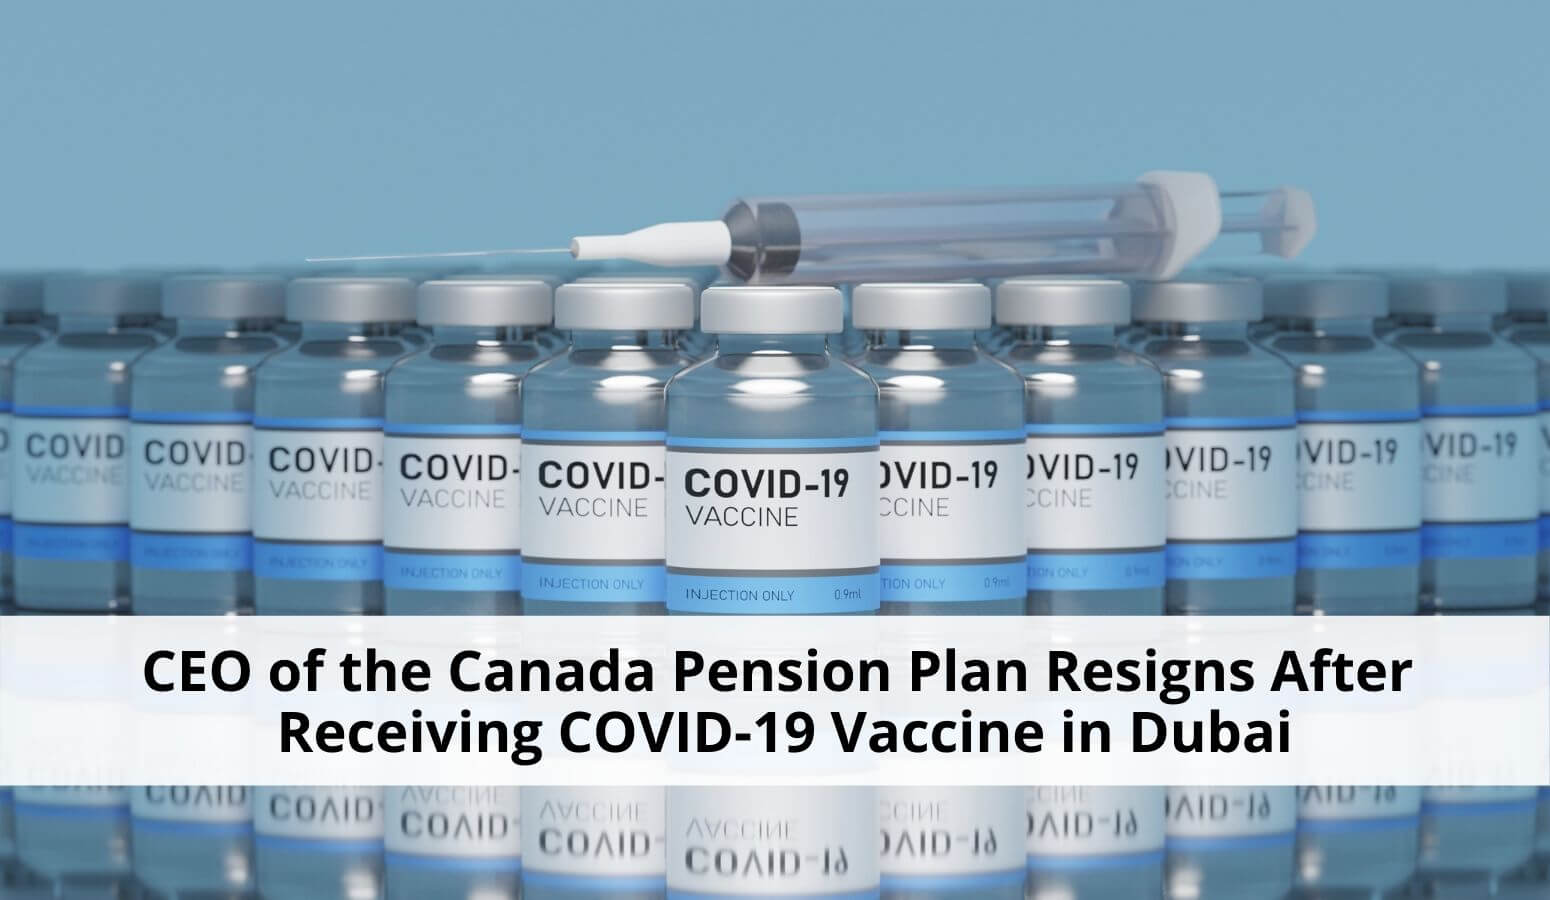 CEO of the Canada Pension Plan resigns